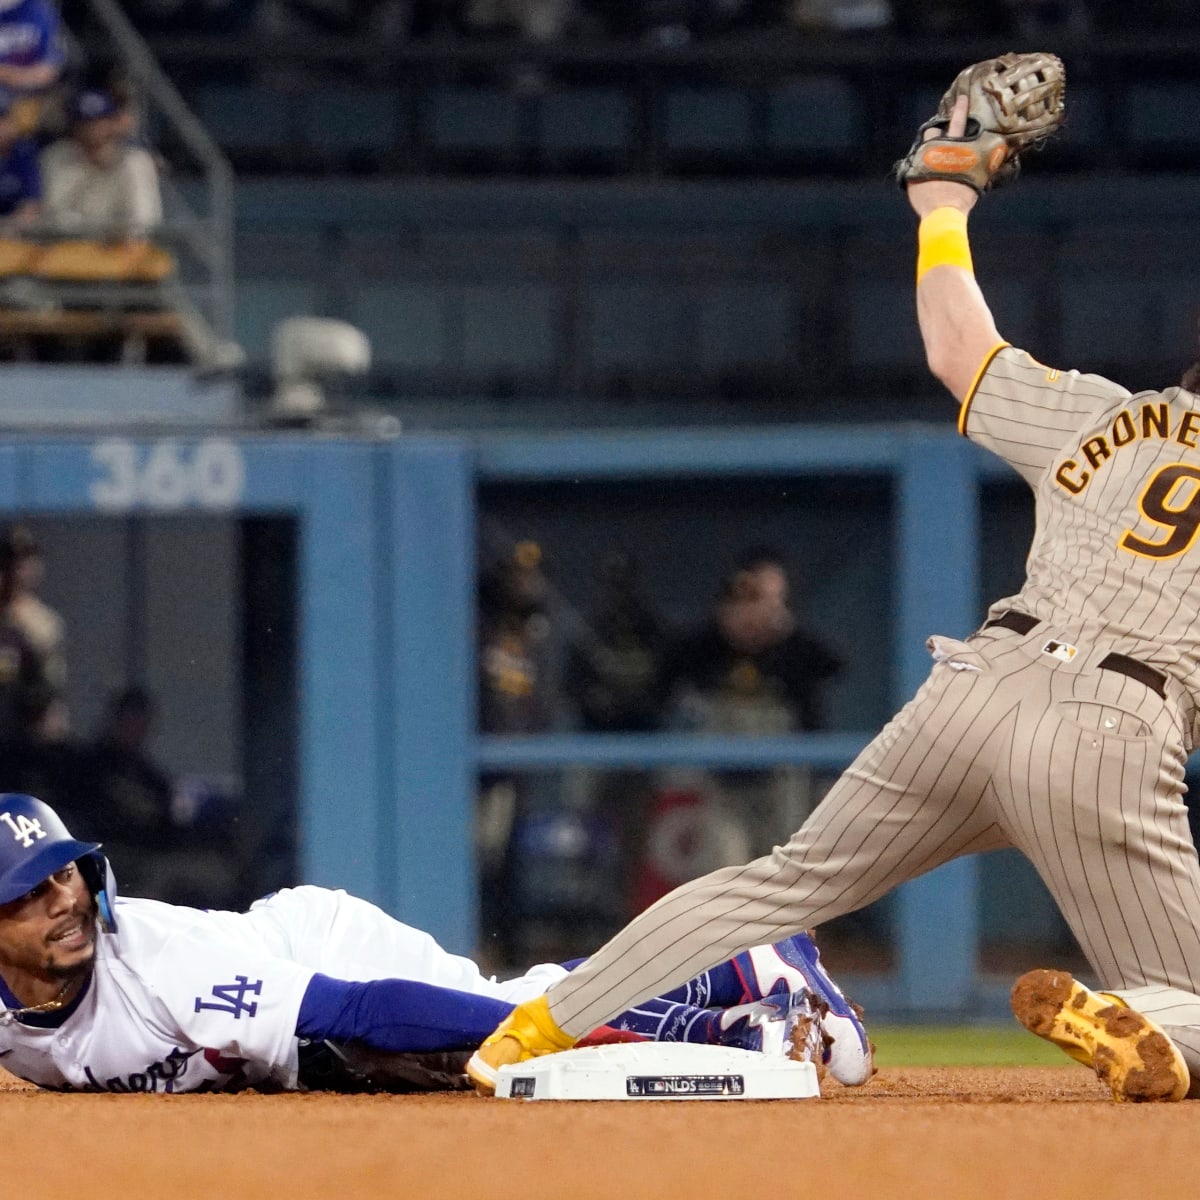 Padres vs. Dodgers game features most improbable caught stealing